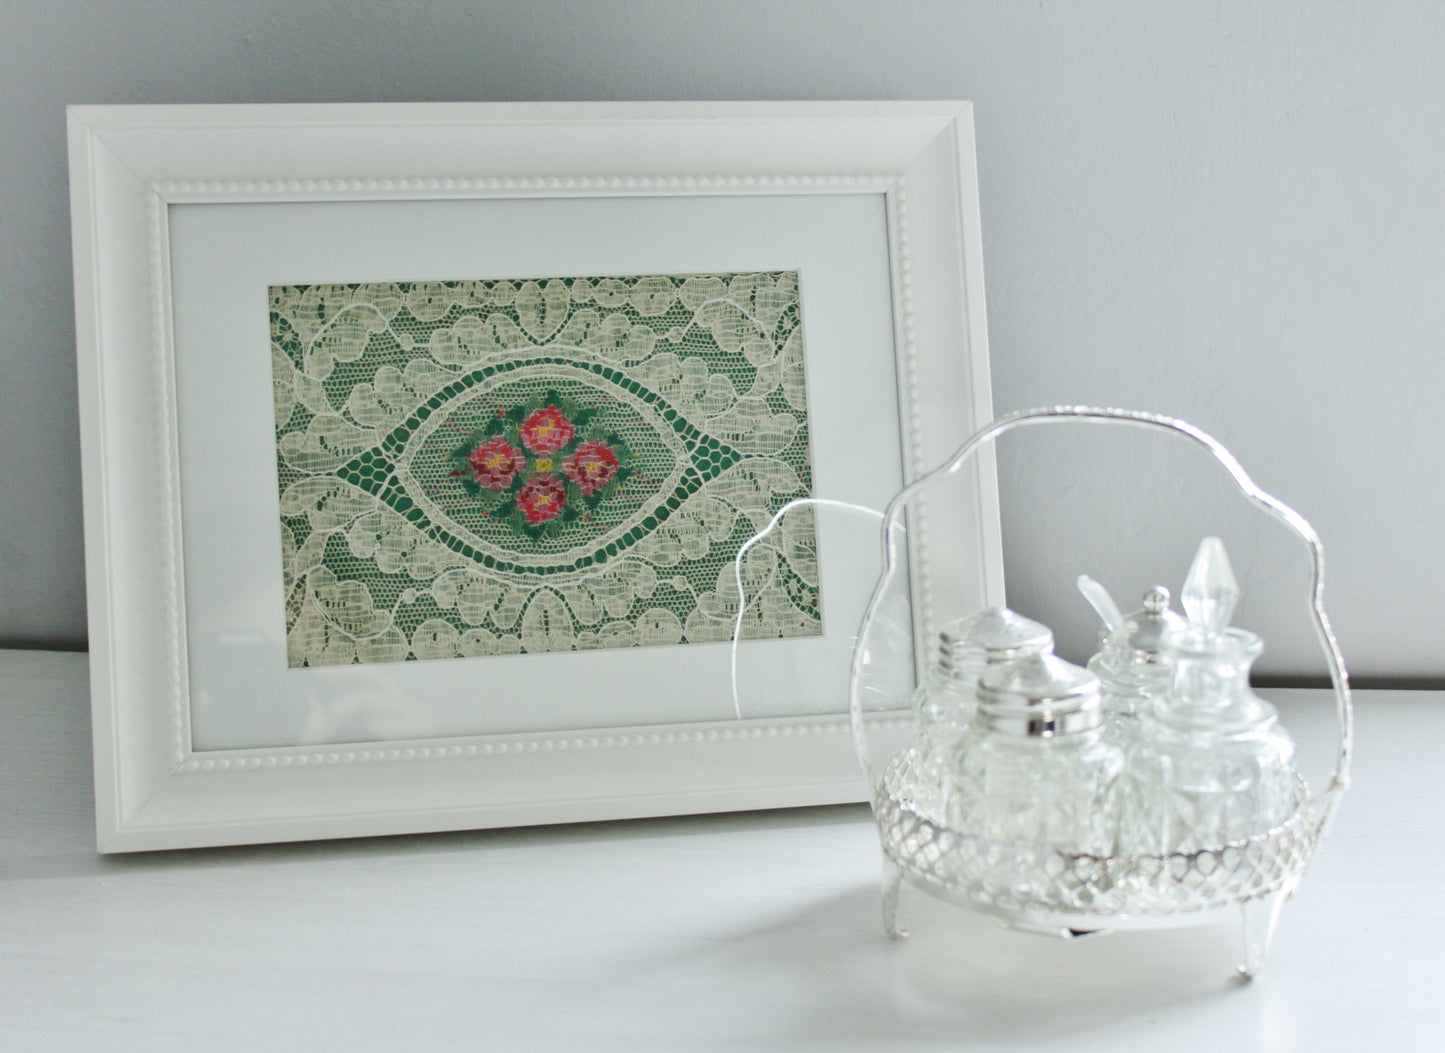 I Only Have Eyes for Beauty Antique Lace in Elegant White Frame